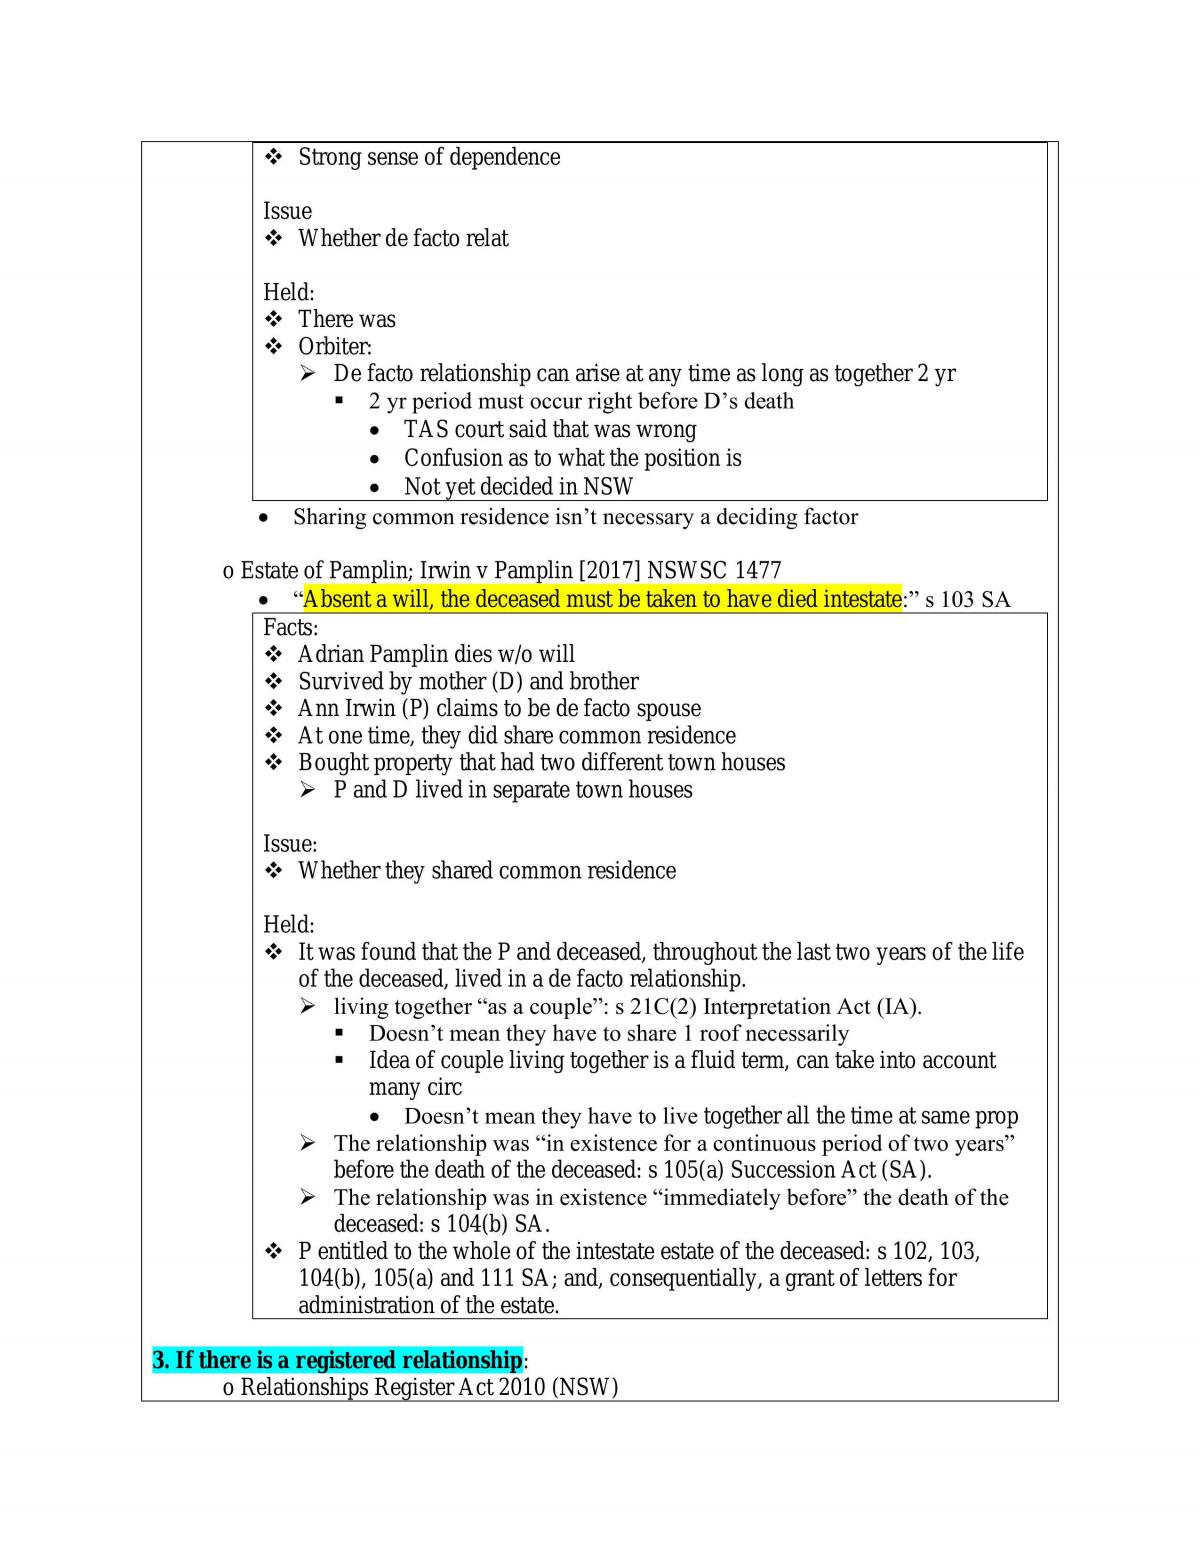 LAWS3427/5127 Death and Inheritance Law Final Notes - Page 20